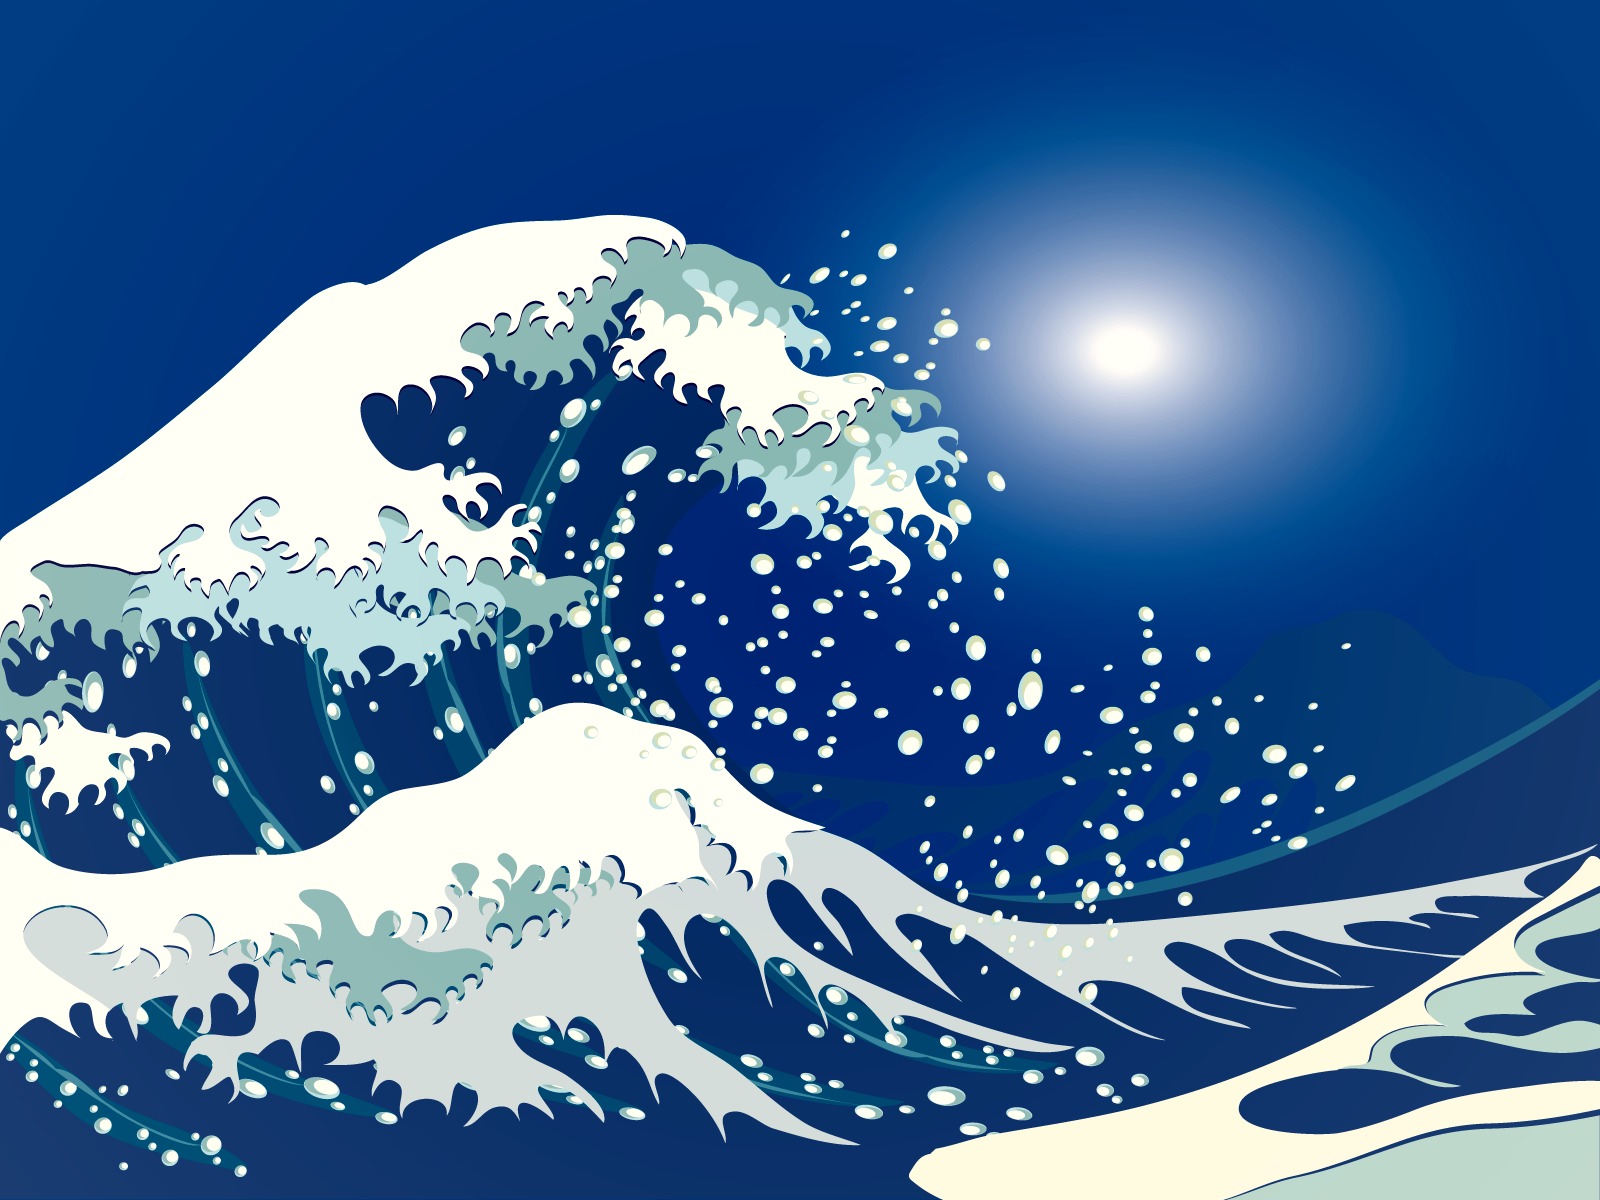 the great wave off kanagawa, artistic, ocean, water, wave